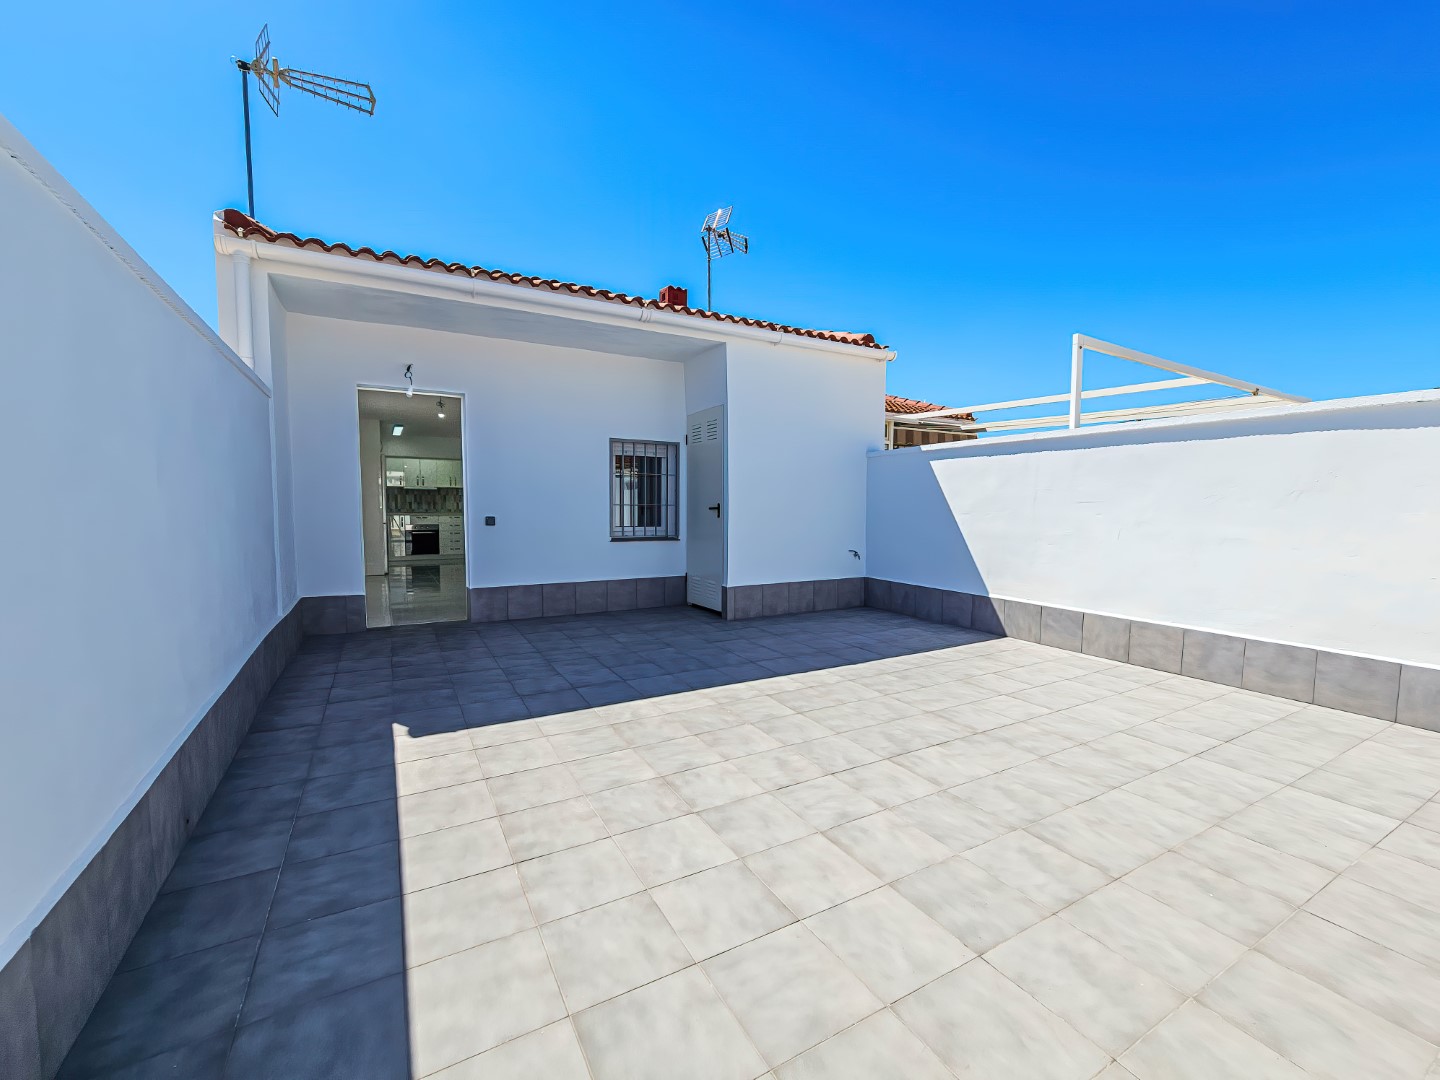 2 Bed, 1 Bath, HouseFor Sale, Torrevieja, Alicante